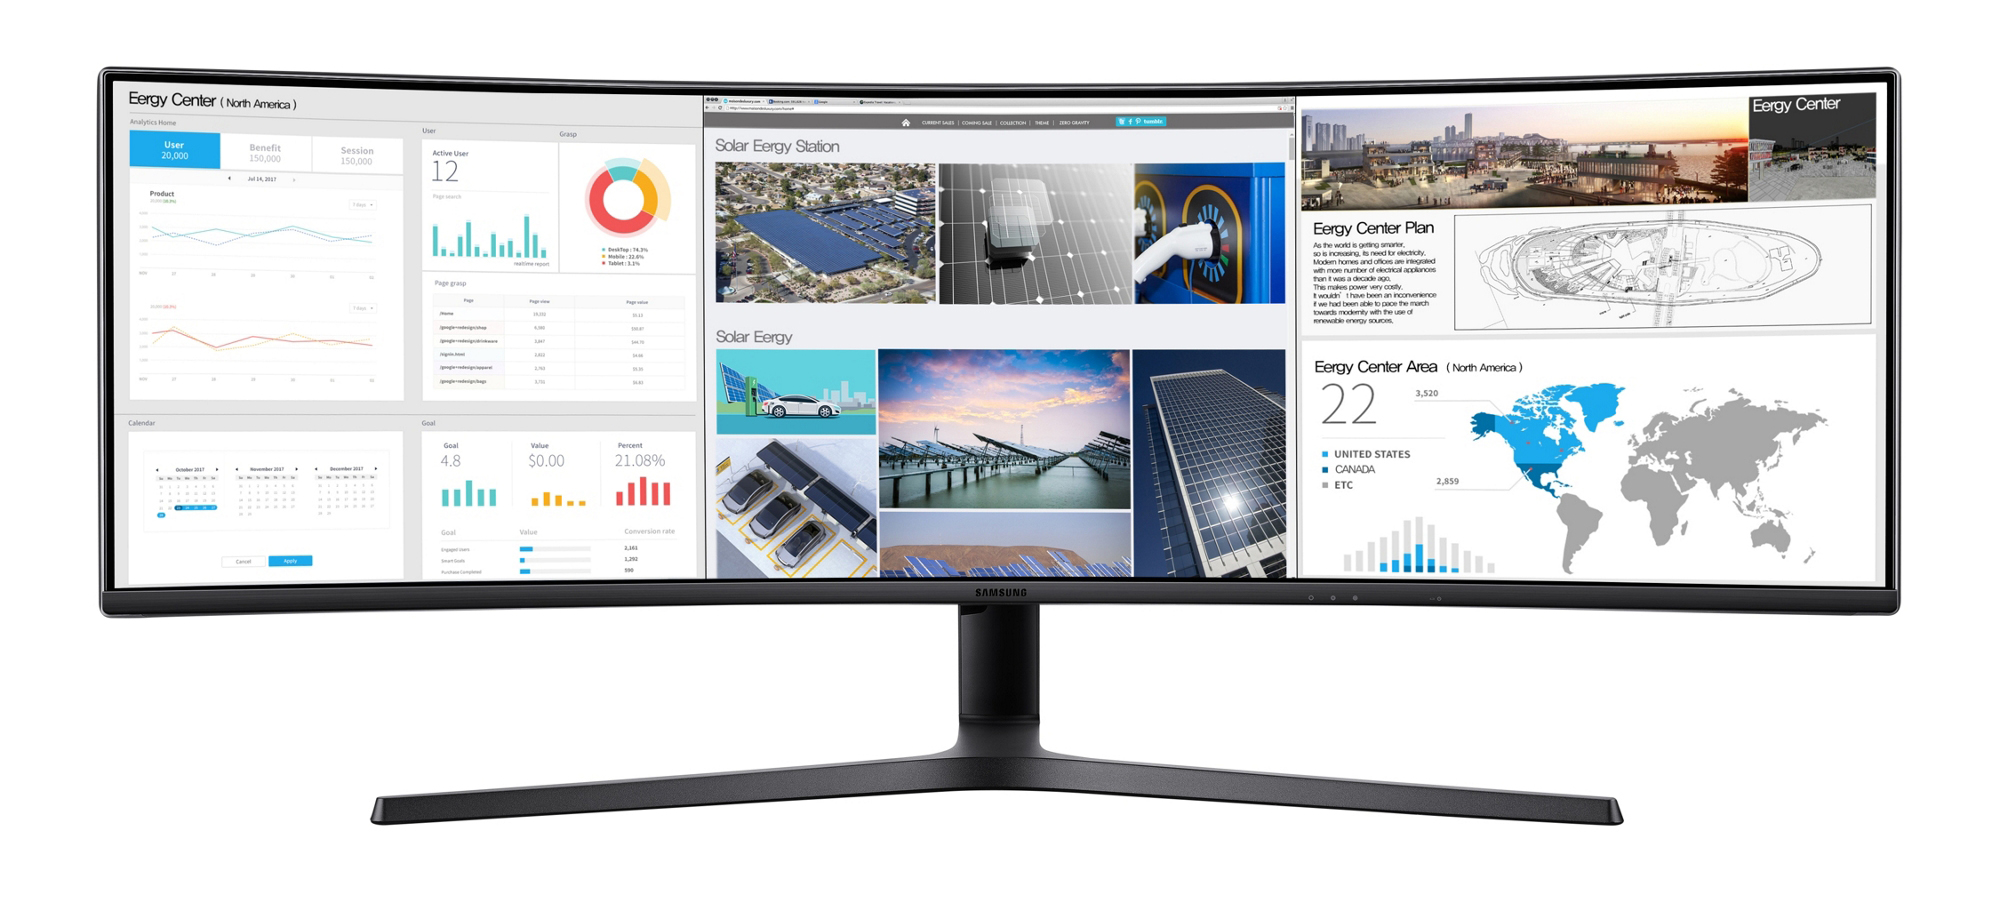 C49J890 - 49 in. Super Ultra-Wide Monitor with USB-C for Business